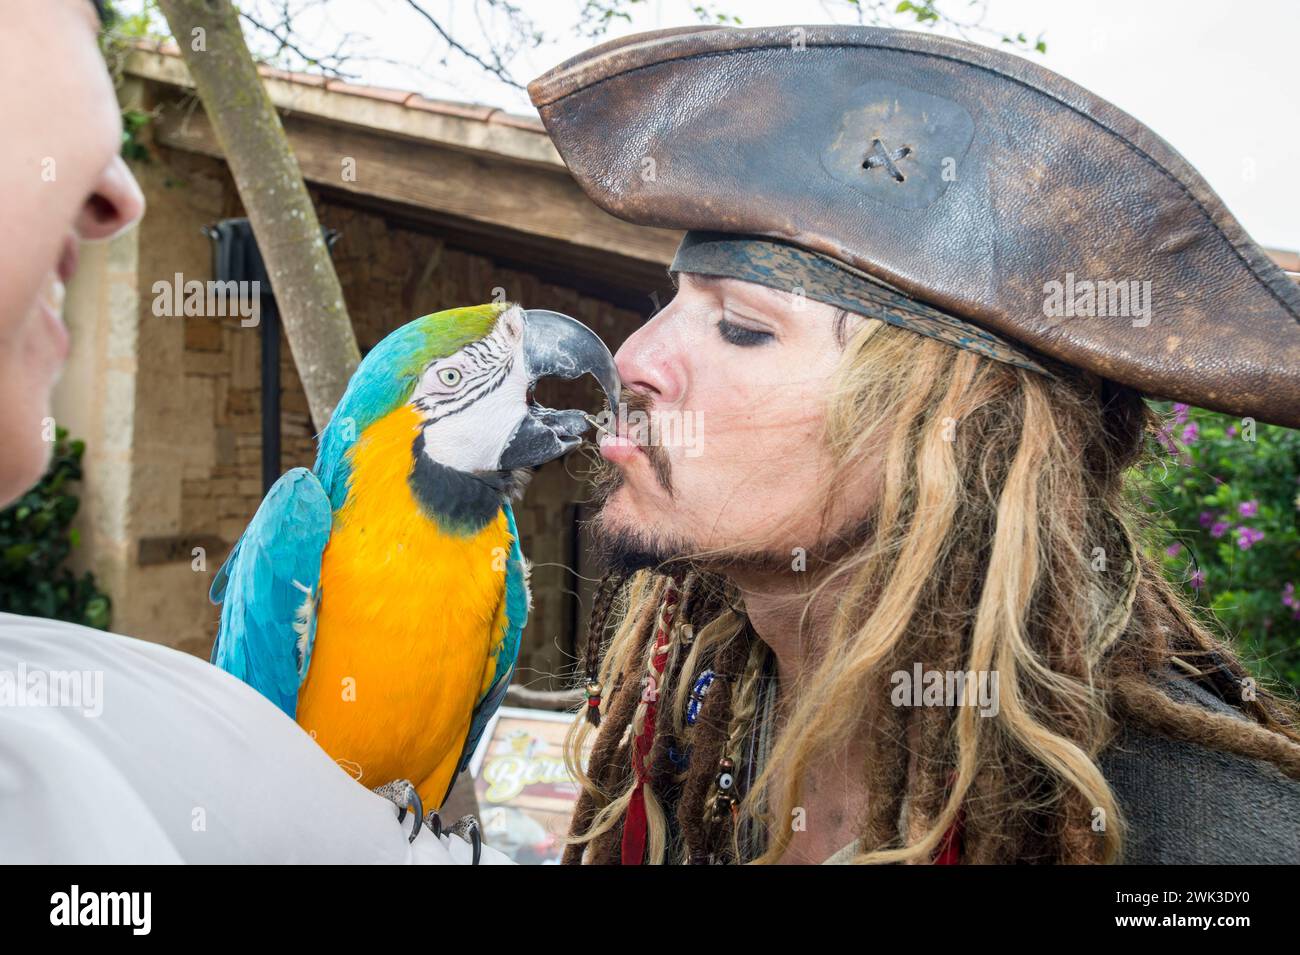 The children's pirate adventure tour 'Mini Mallorca' with Jack Sparrow Double 'The German Jack' Björn Kuhlow on a trip across the island. Stock Photo